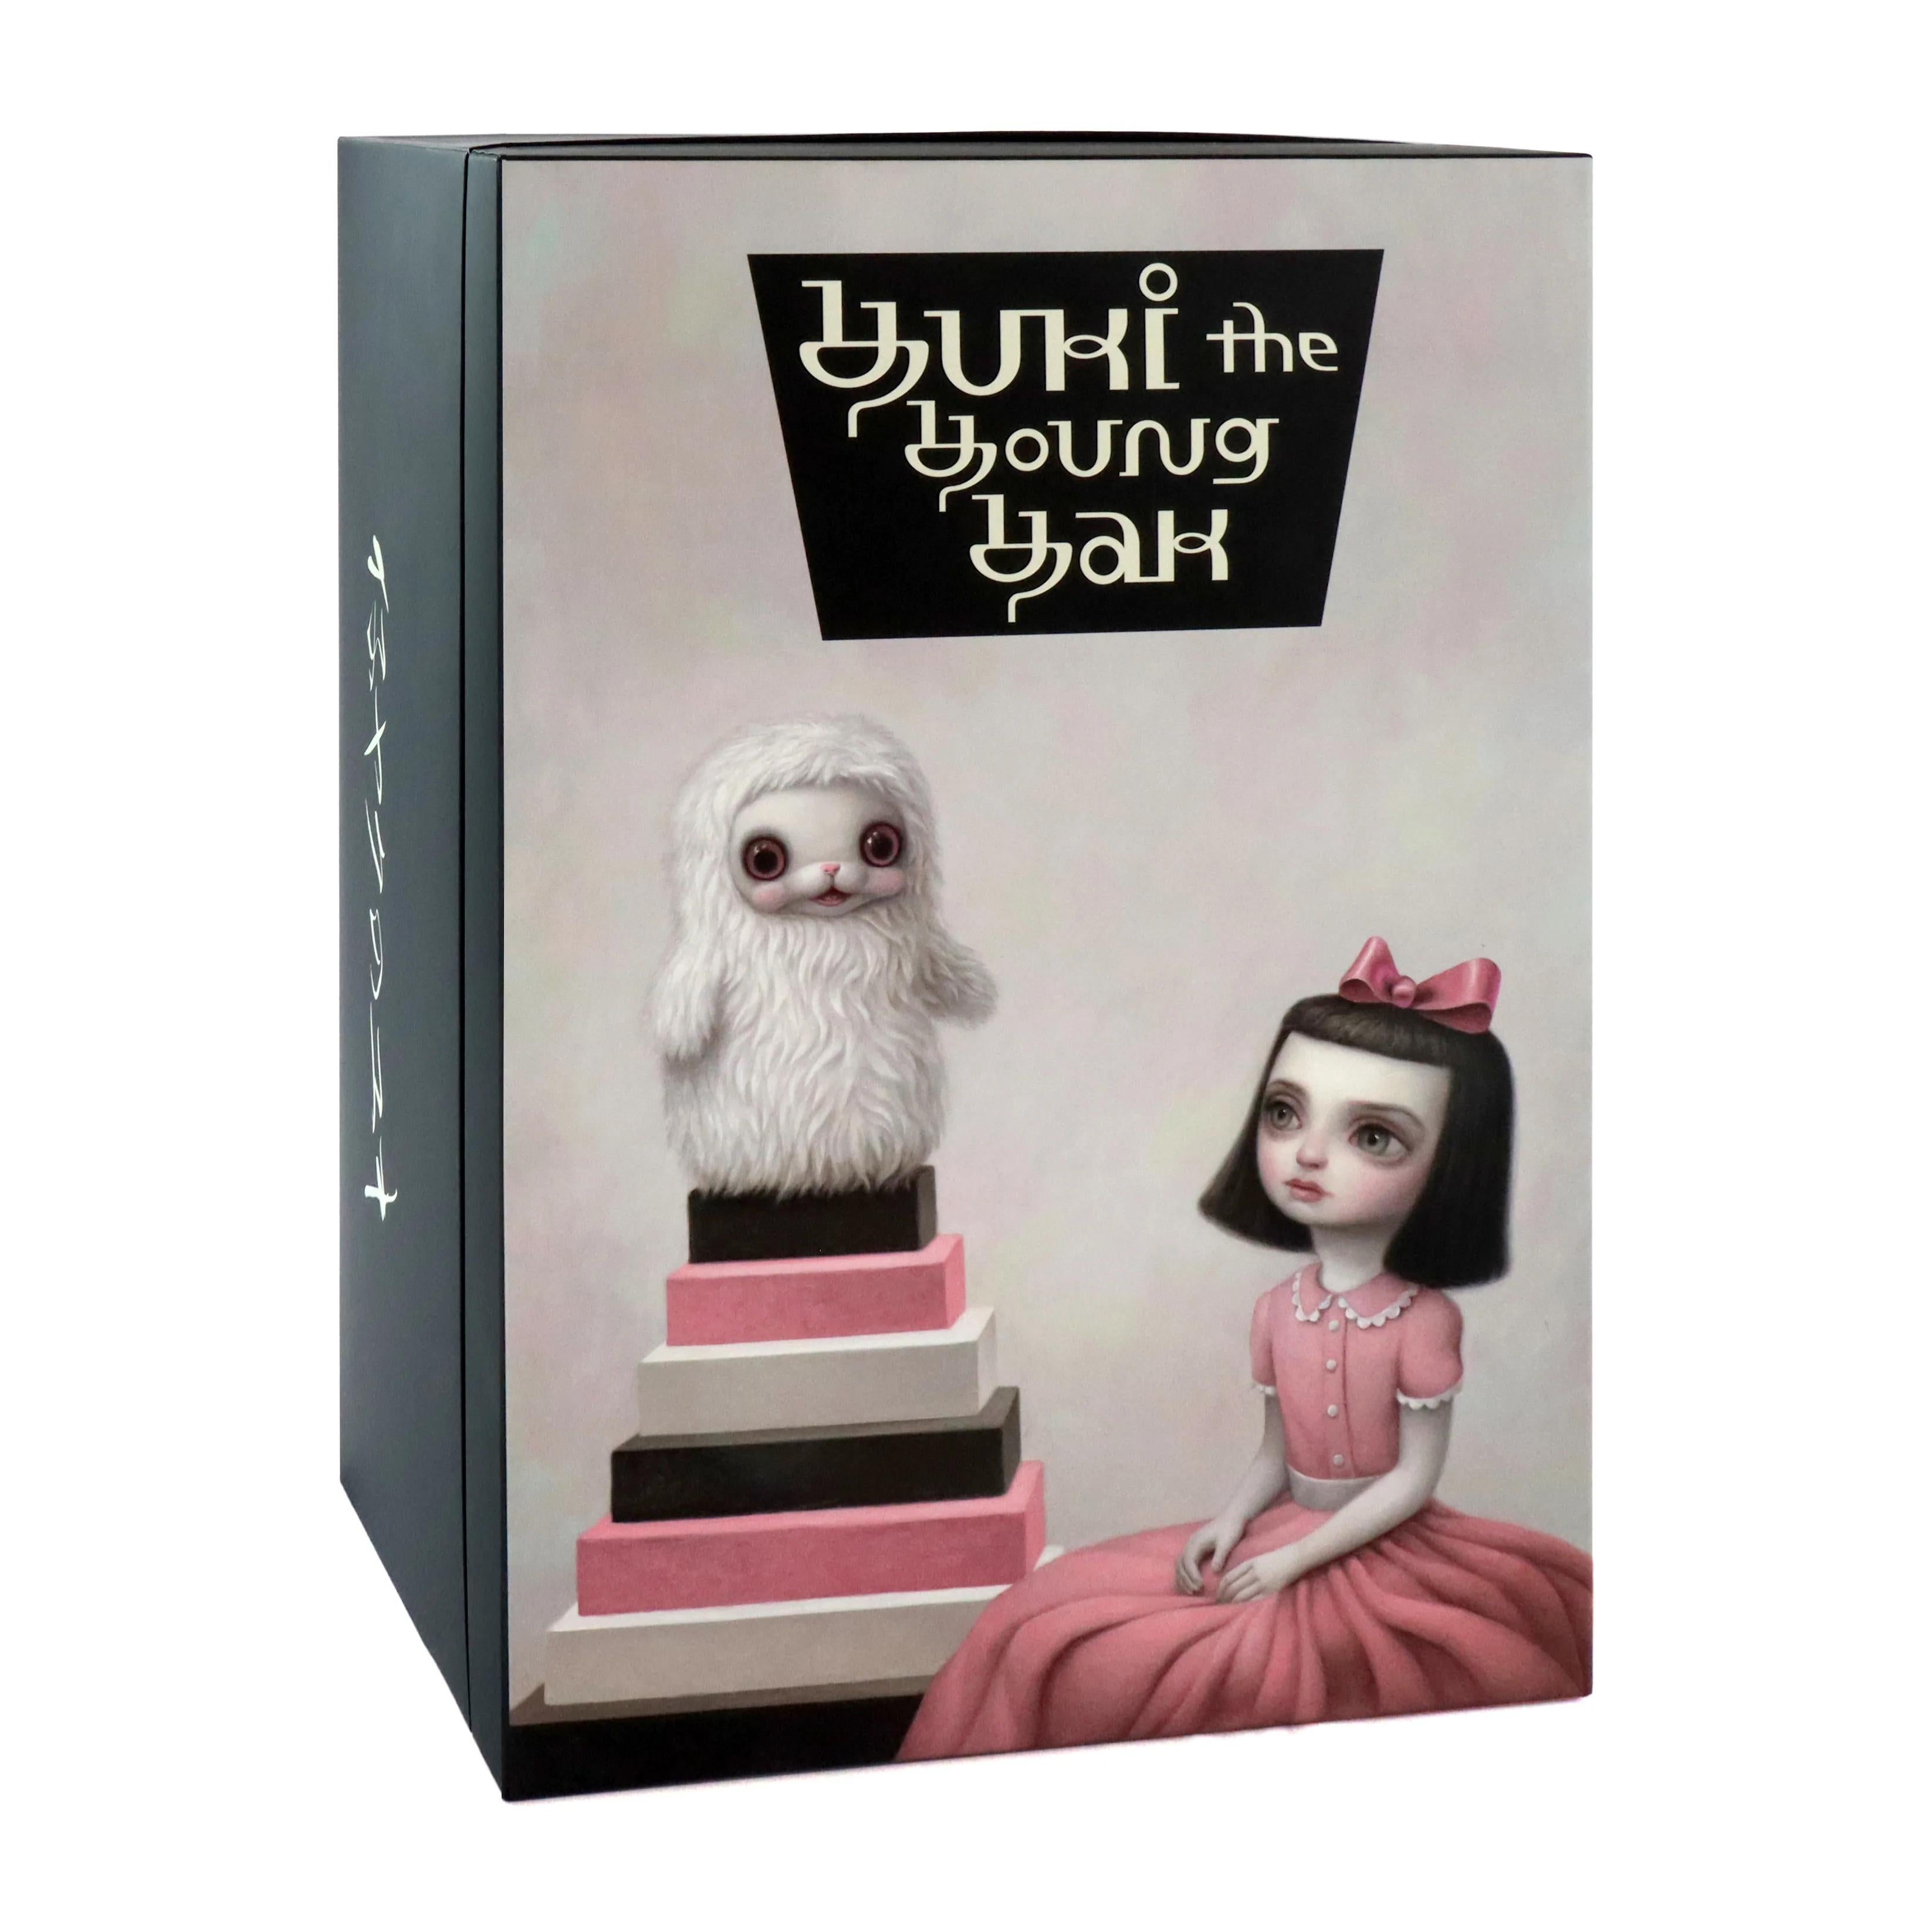 MARK RYDEN - YUKI THE YOUNG YAK (WHITE) Limited Surrealism Lowbrow Art Design - Gray Figurative Sculpture by Mark Ryden